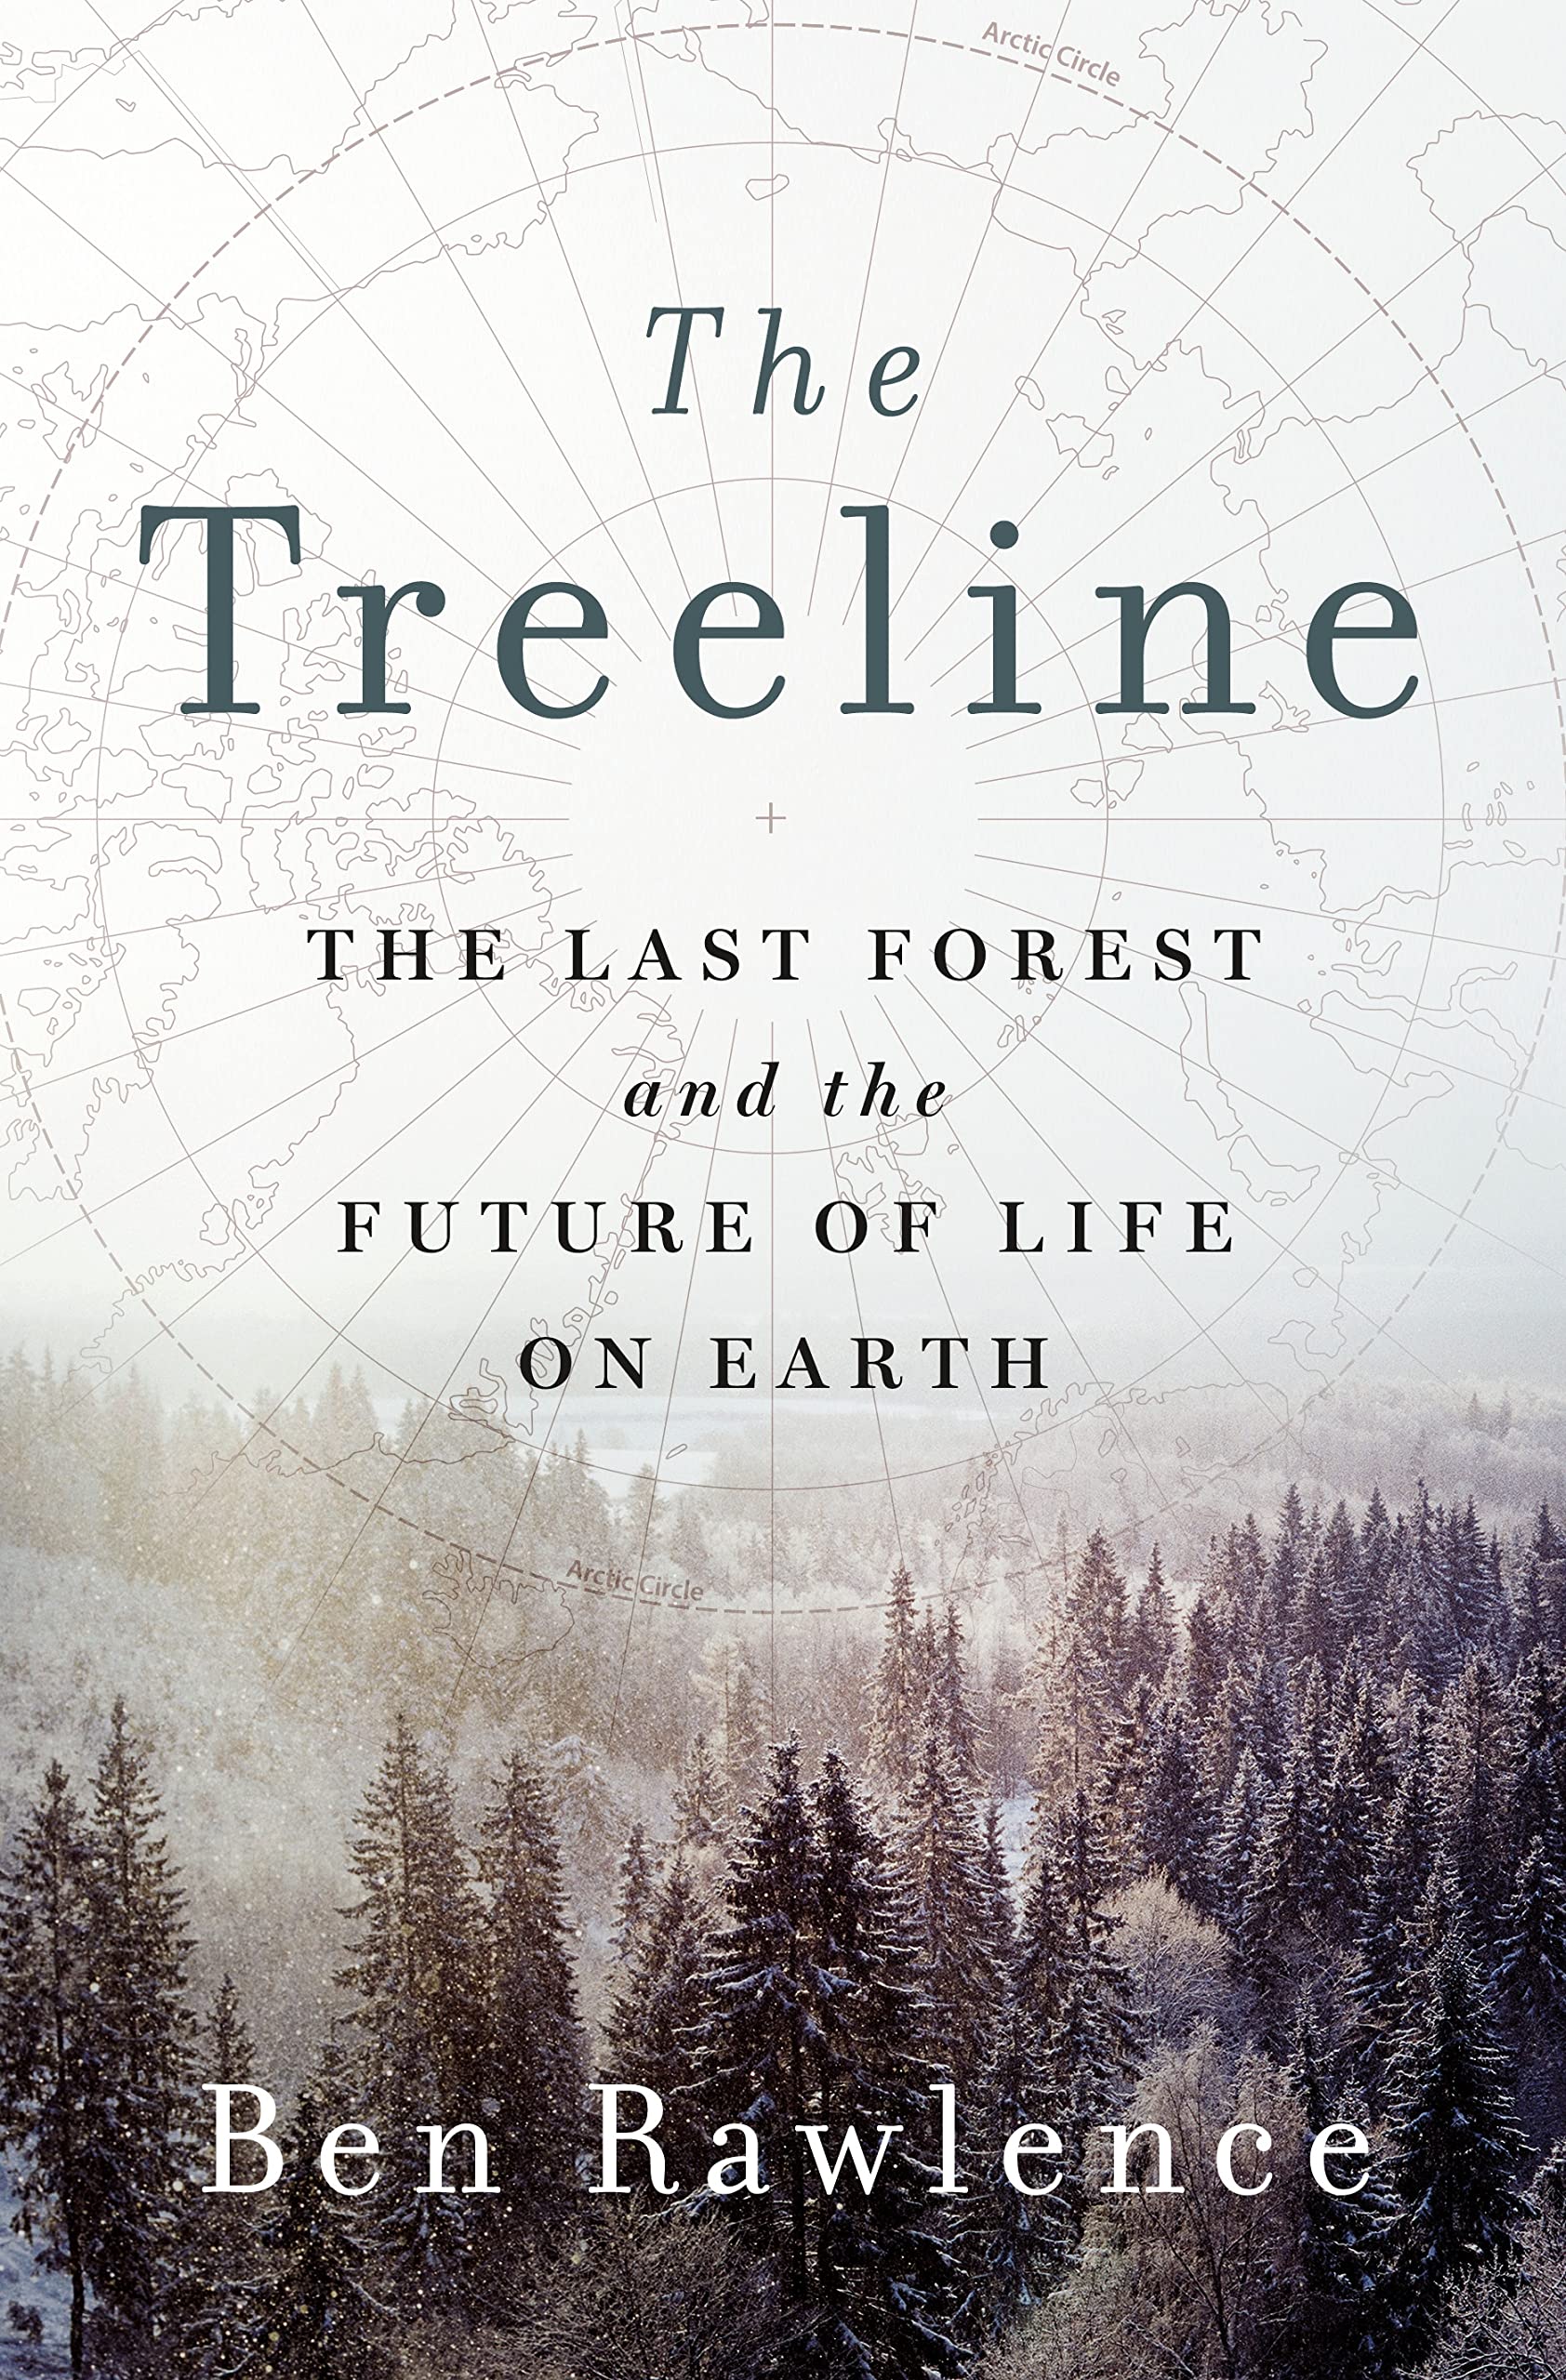 Image for "The Treeline: The Last Forest and the Future of Life on Earth"